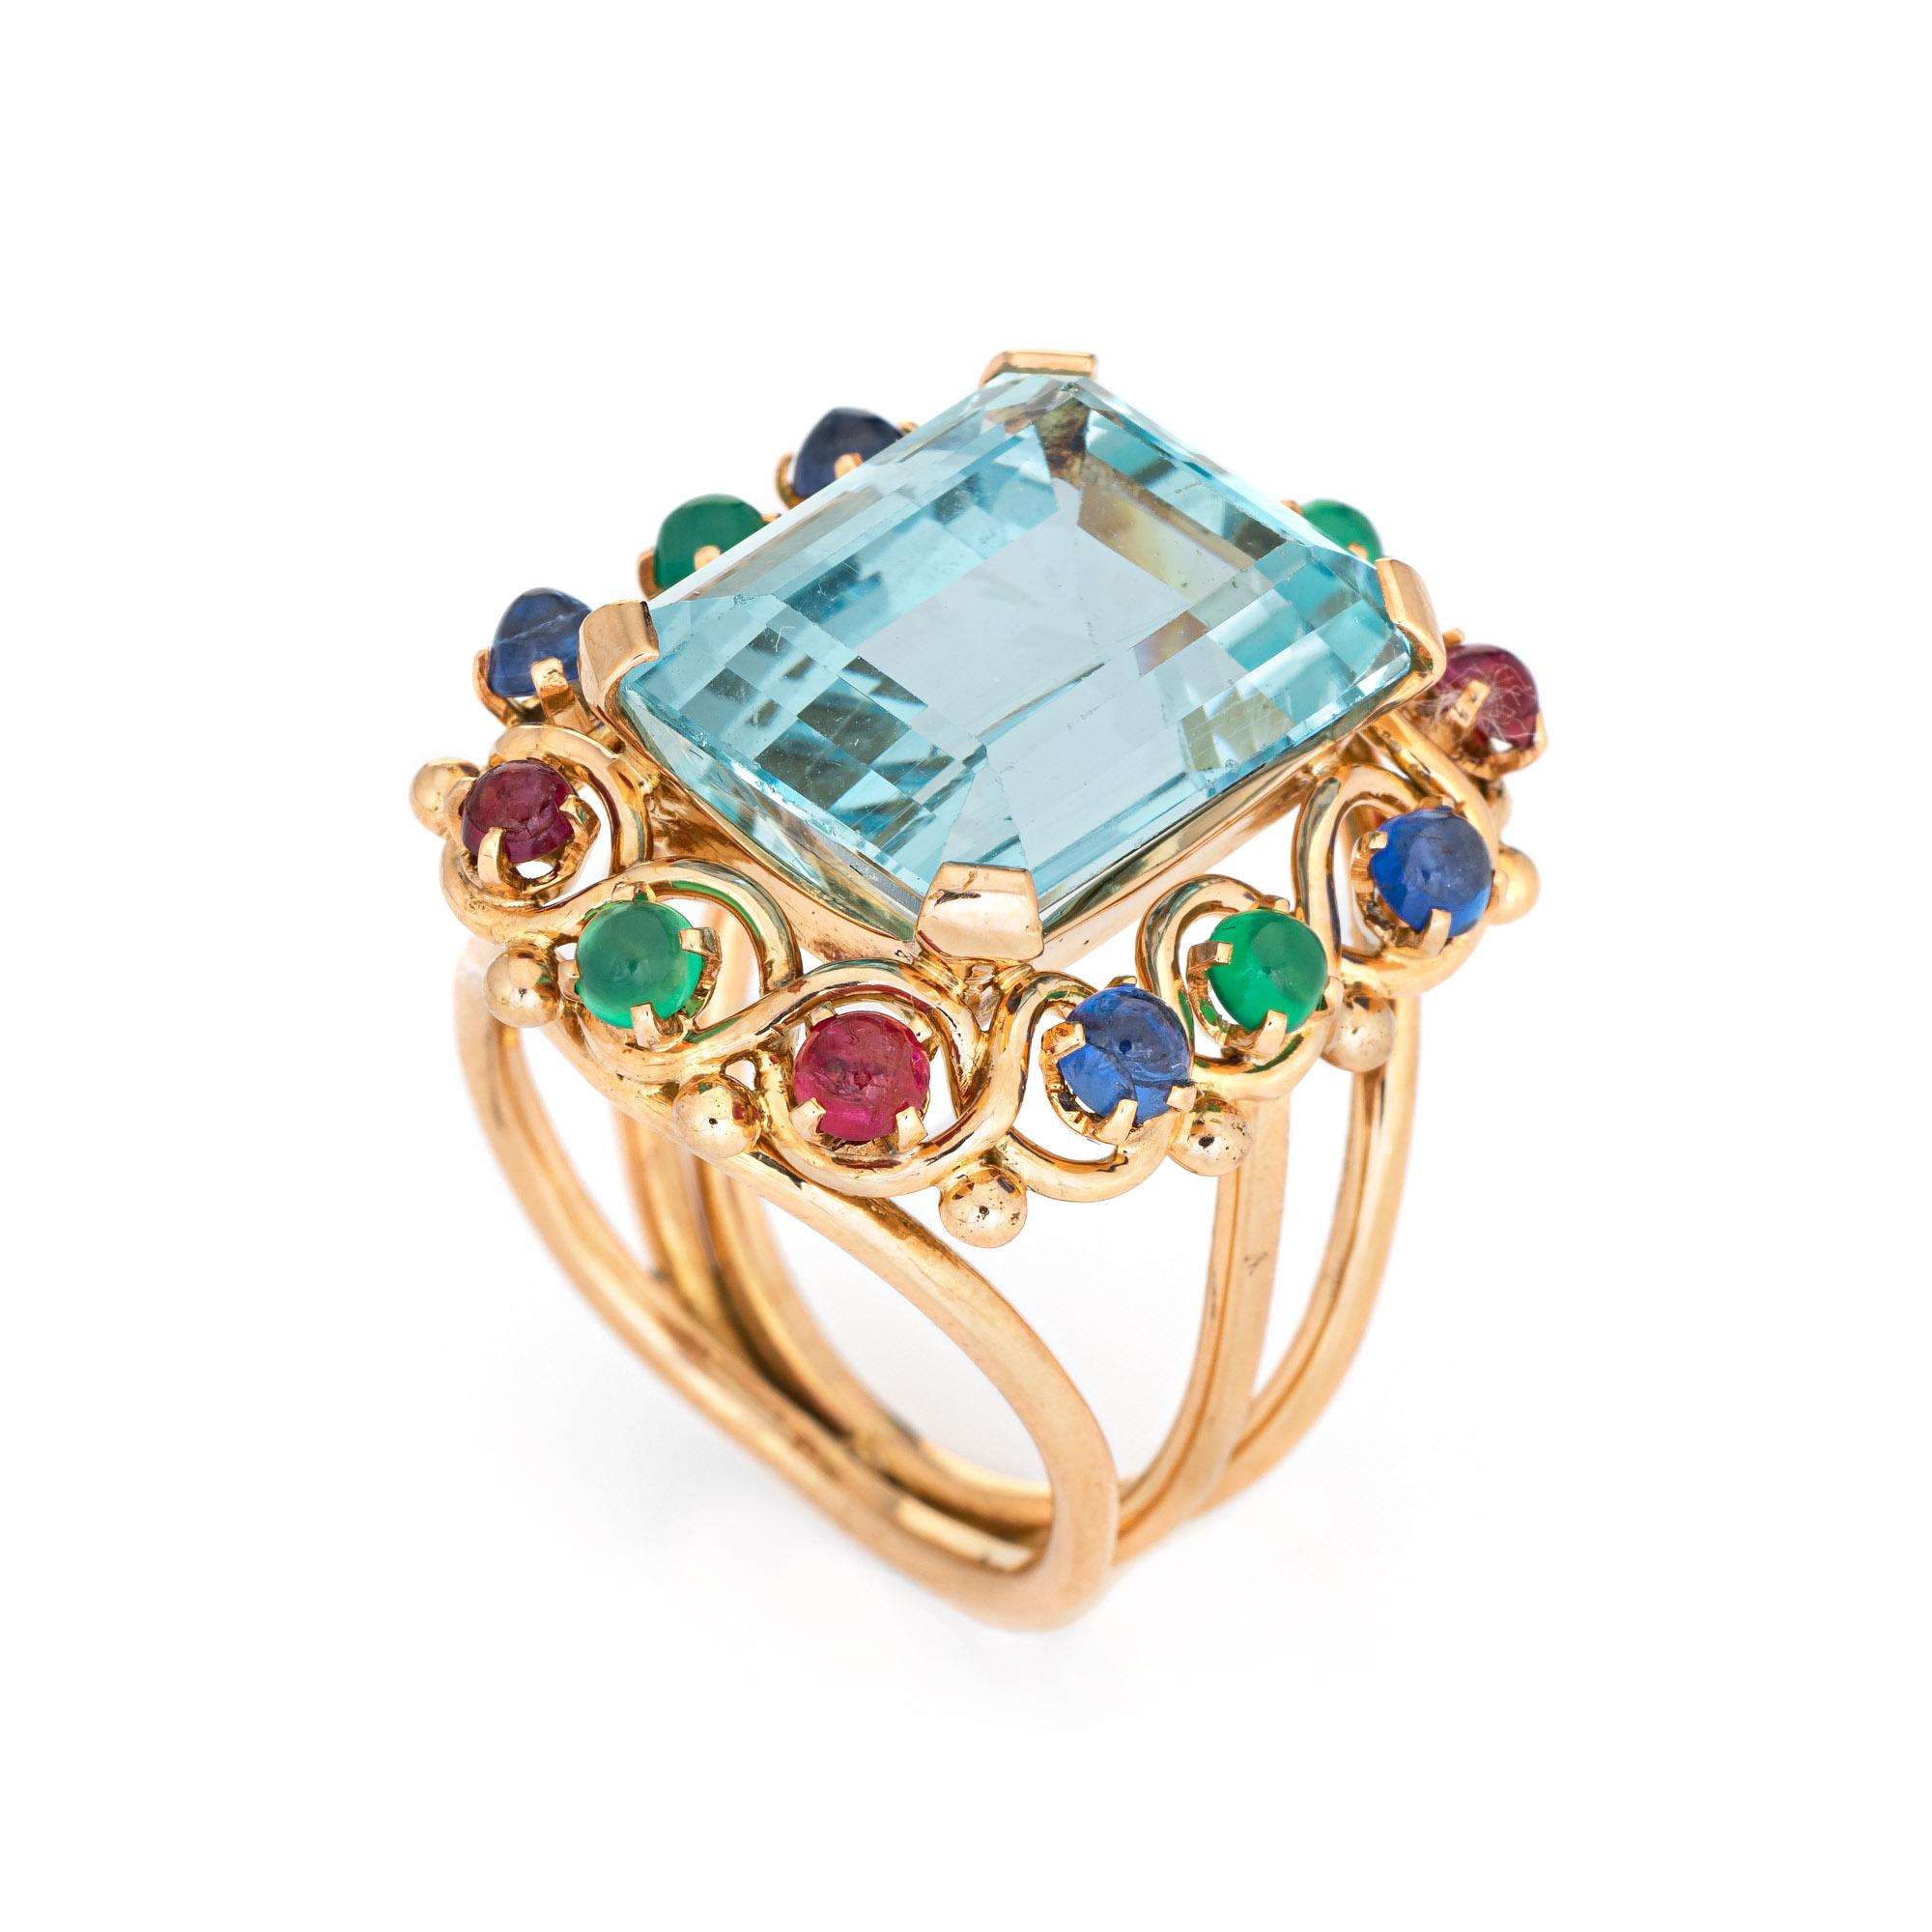 Stylish vintage aquamarine & emerald cocktail ring (circa 1950s to 1960s) crafted in 14 karat yellow gold. 

Emerald cut aquamarine measures 16.5mm x 14mm (estimated at 16.50 carats), accented with an estimated 1.80 carats of cabochon cut emeralds,